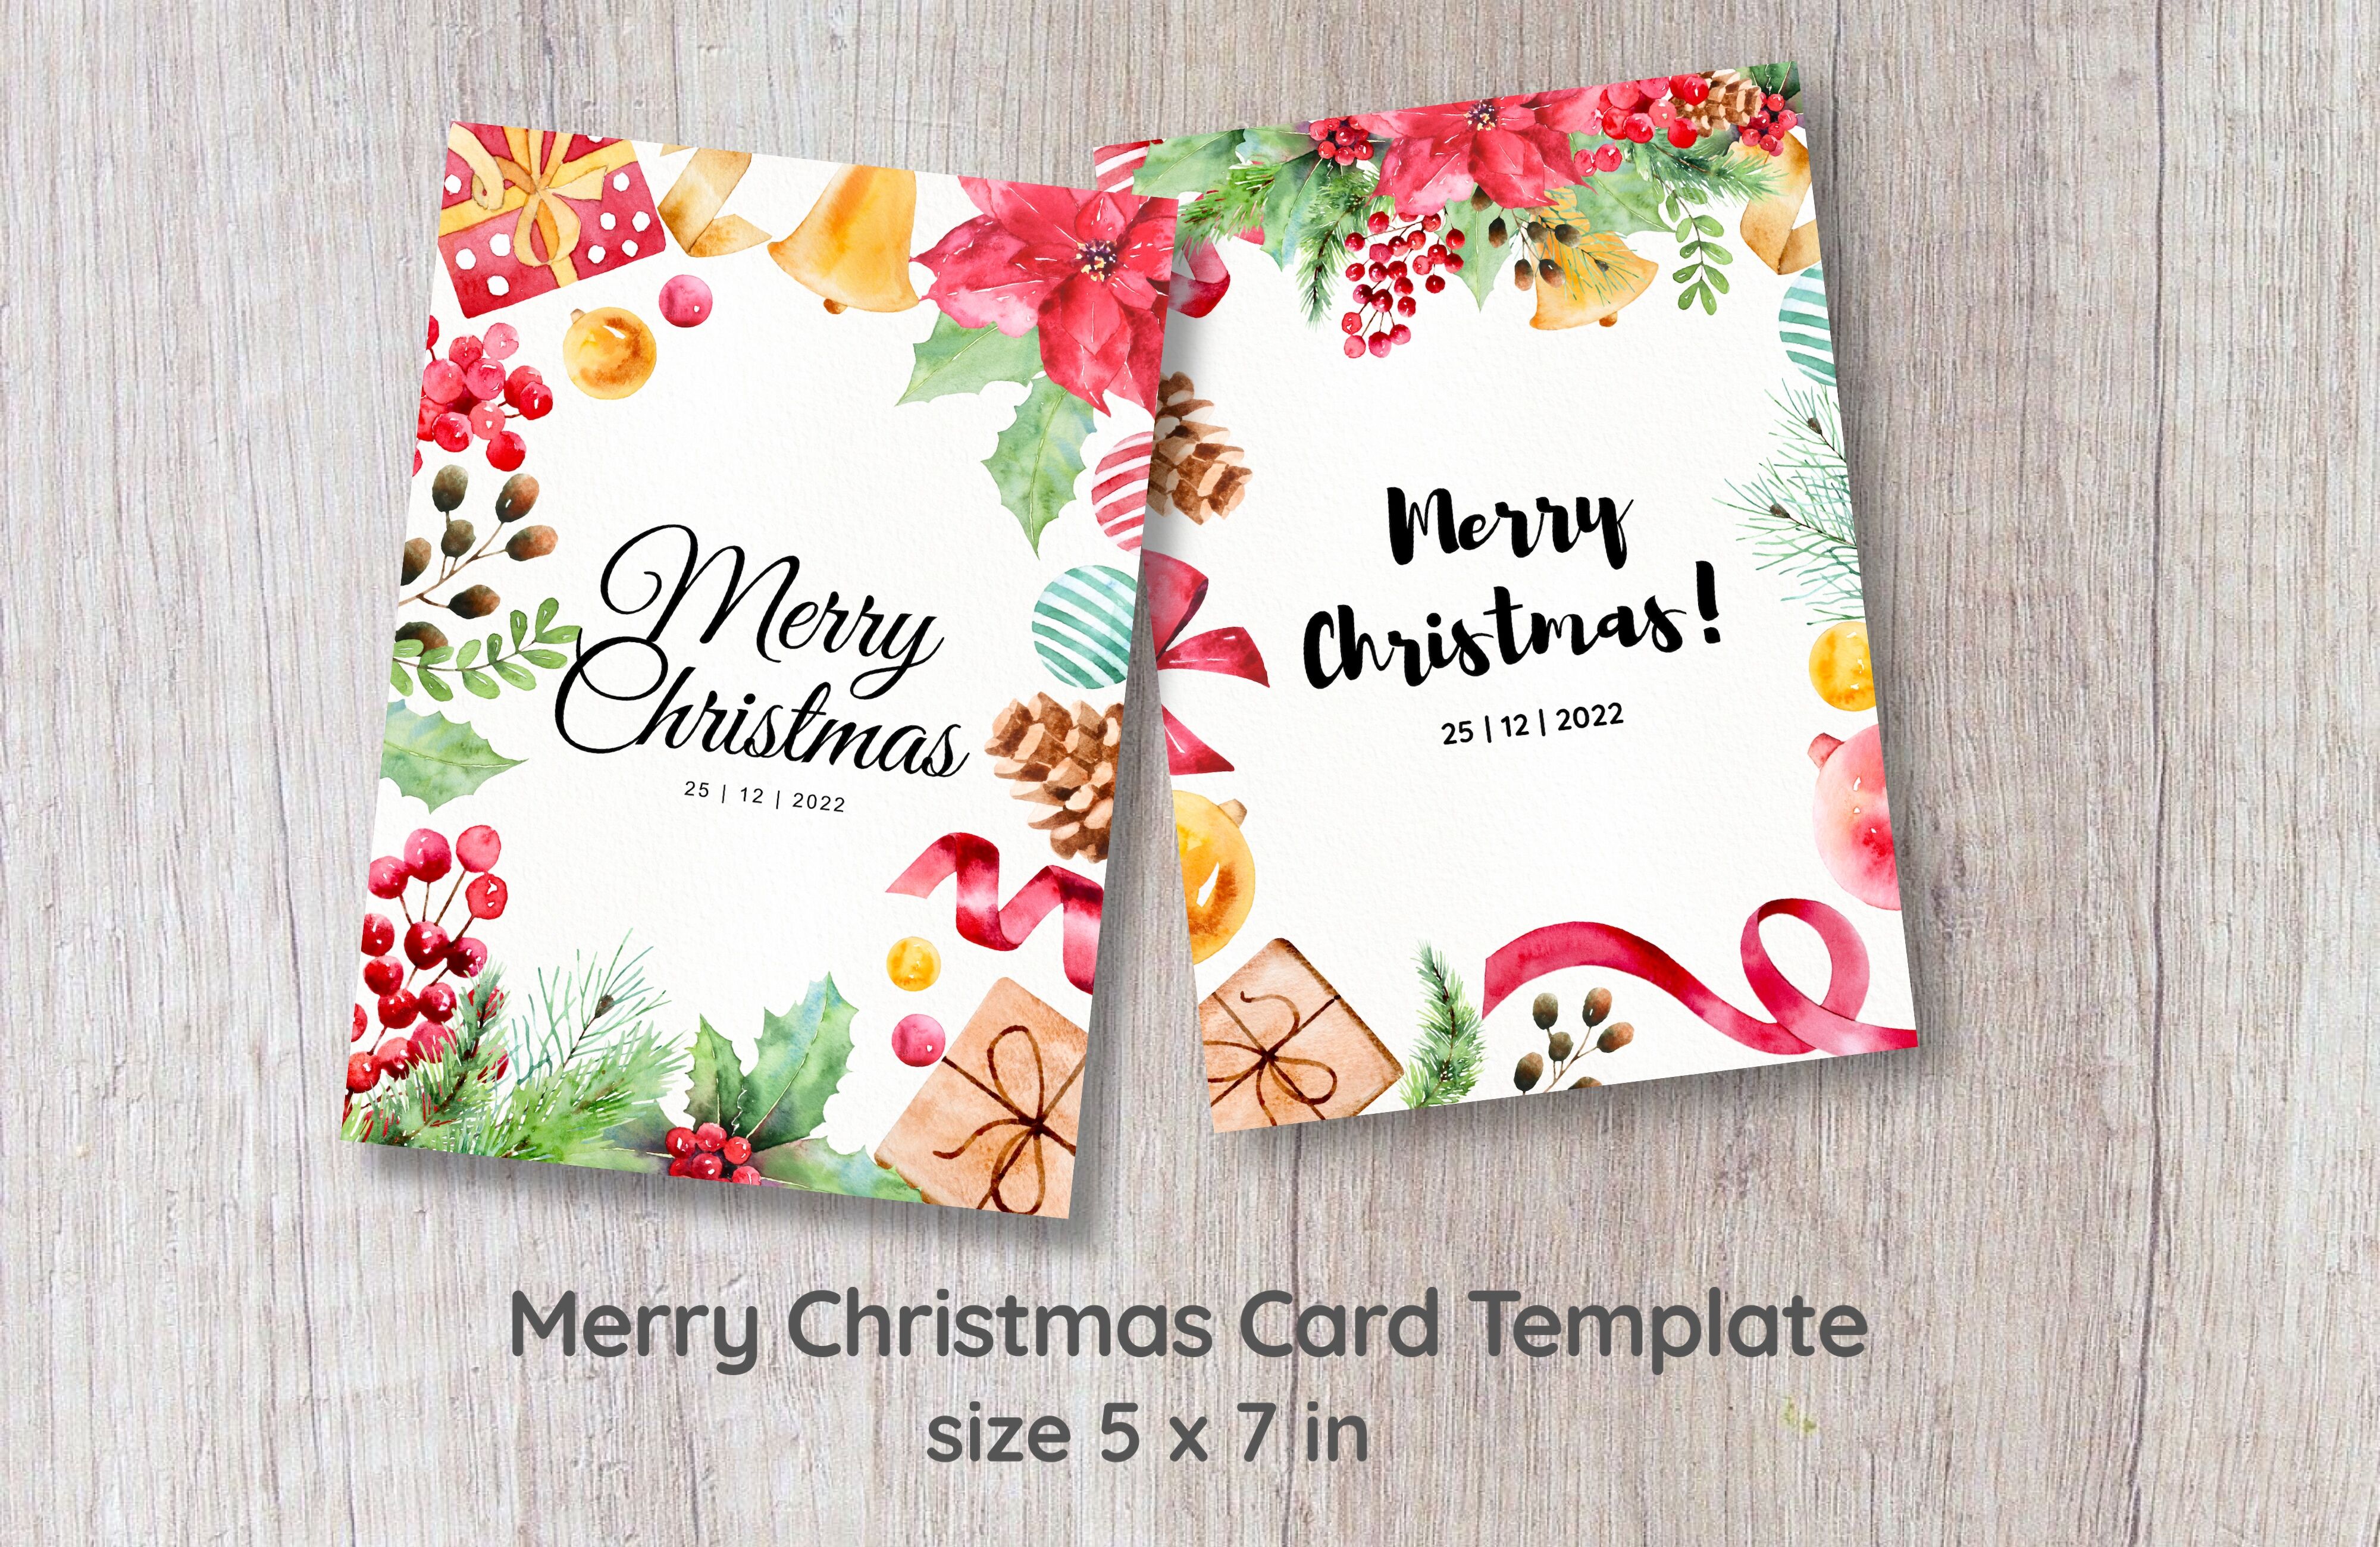 Merry Christmas Watercolor Clip Art By Aekgasit watercolors | TheHungryJPEG